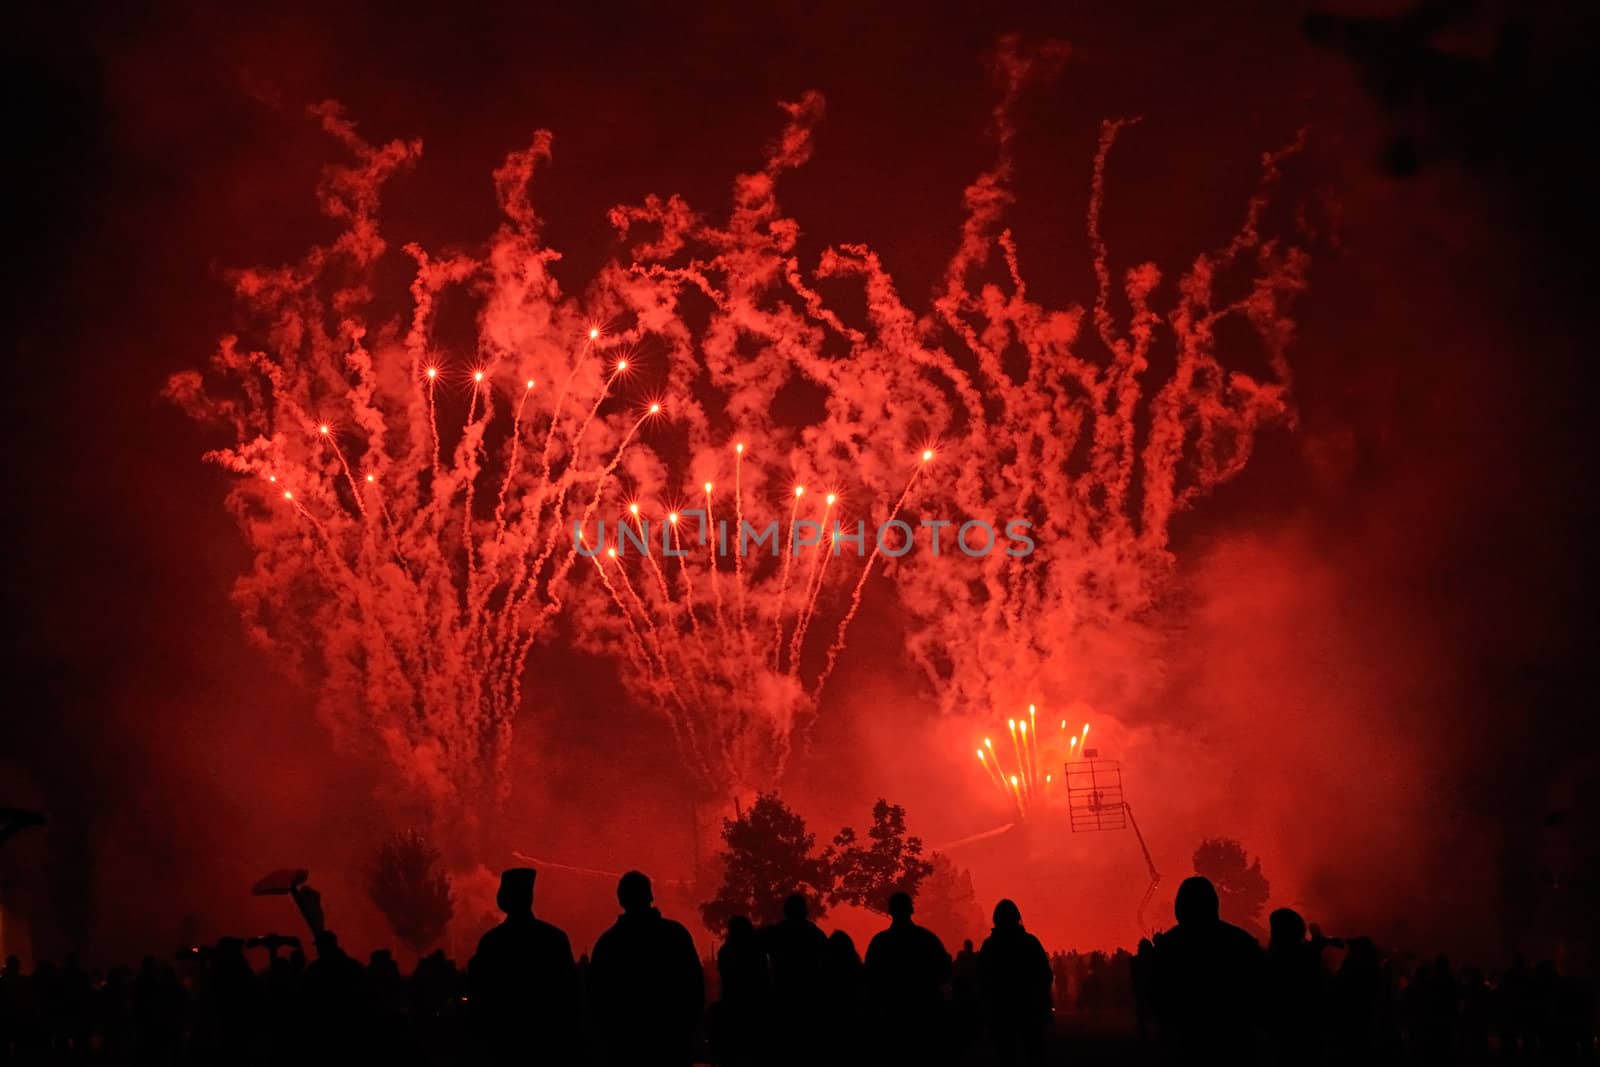 Red fireworks with people silhouettes in foreground